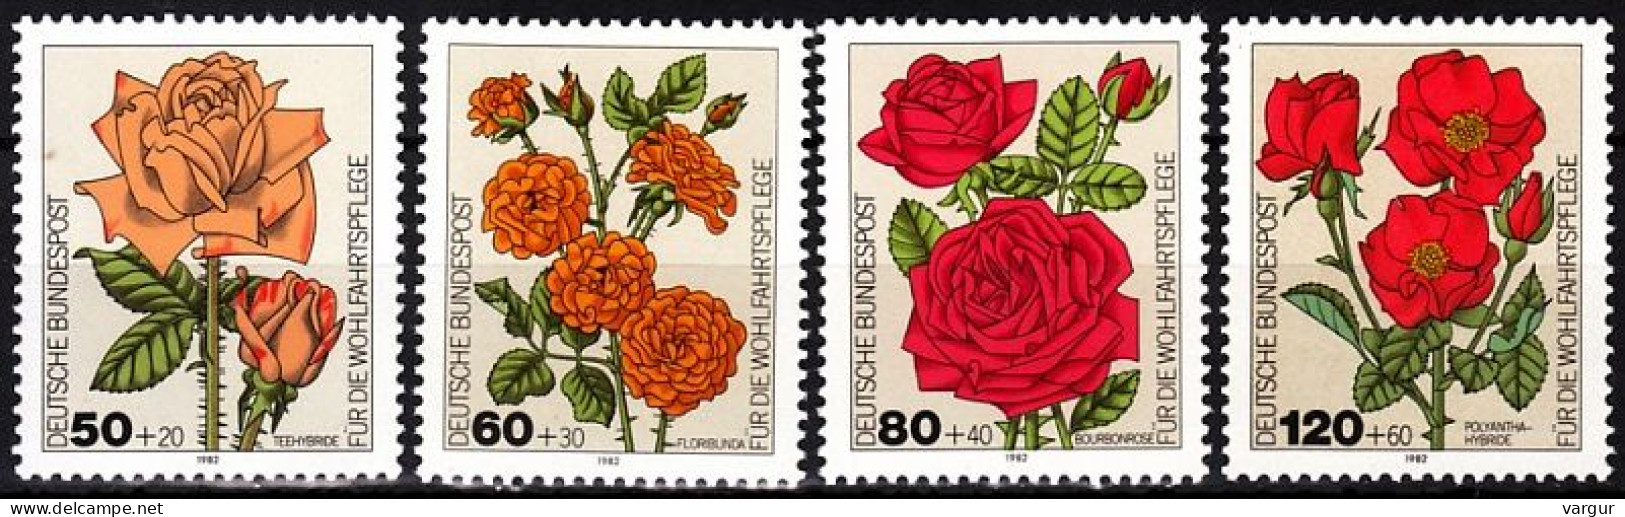 GERMANY FRG 1982 FLORA Plants Flowers: Garden Roses. Charity. Complete Set, MNH - Rose